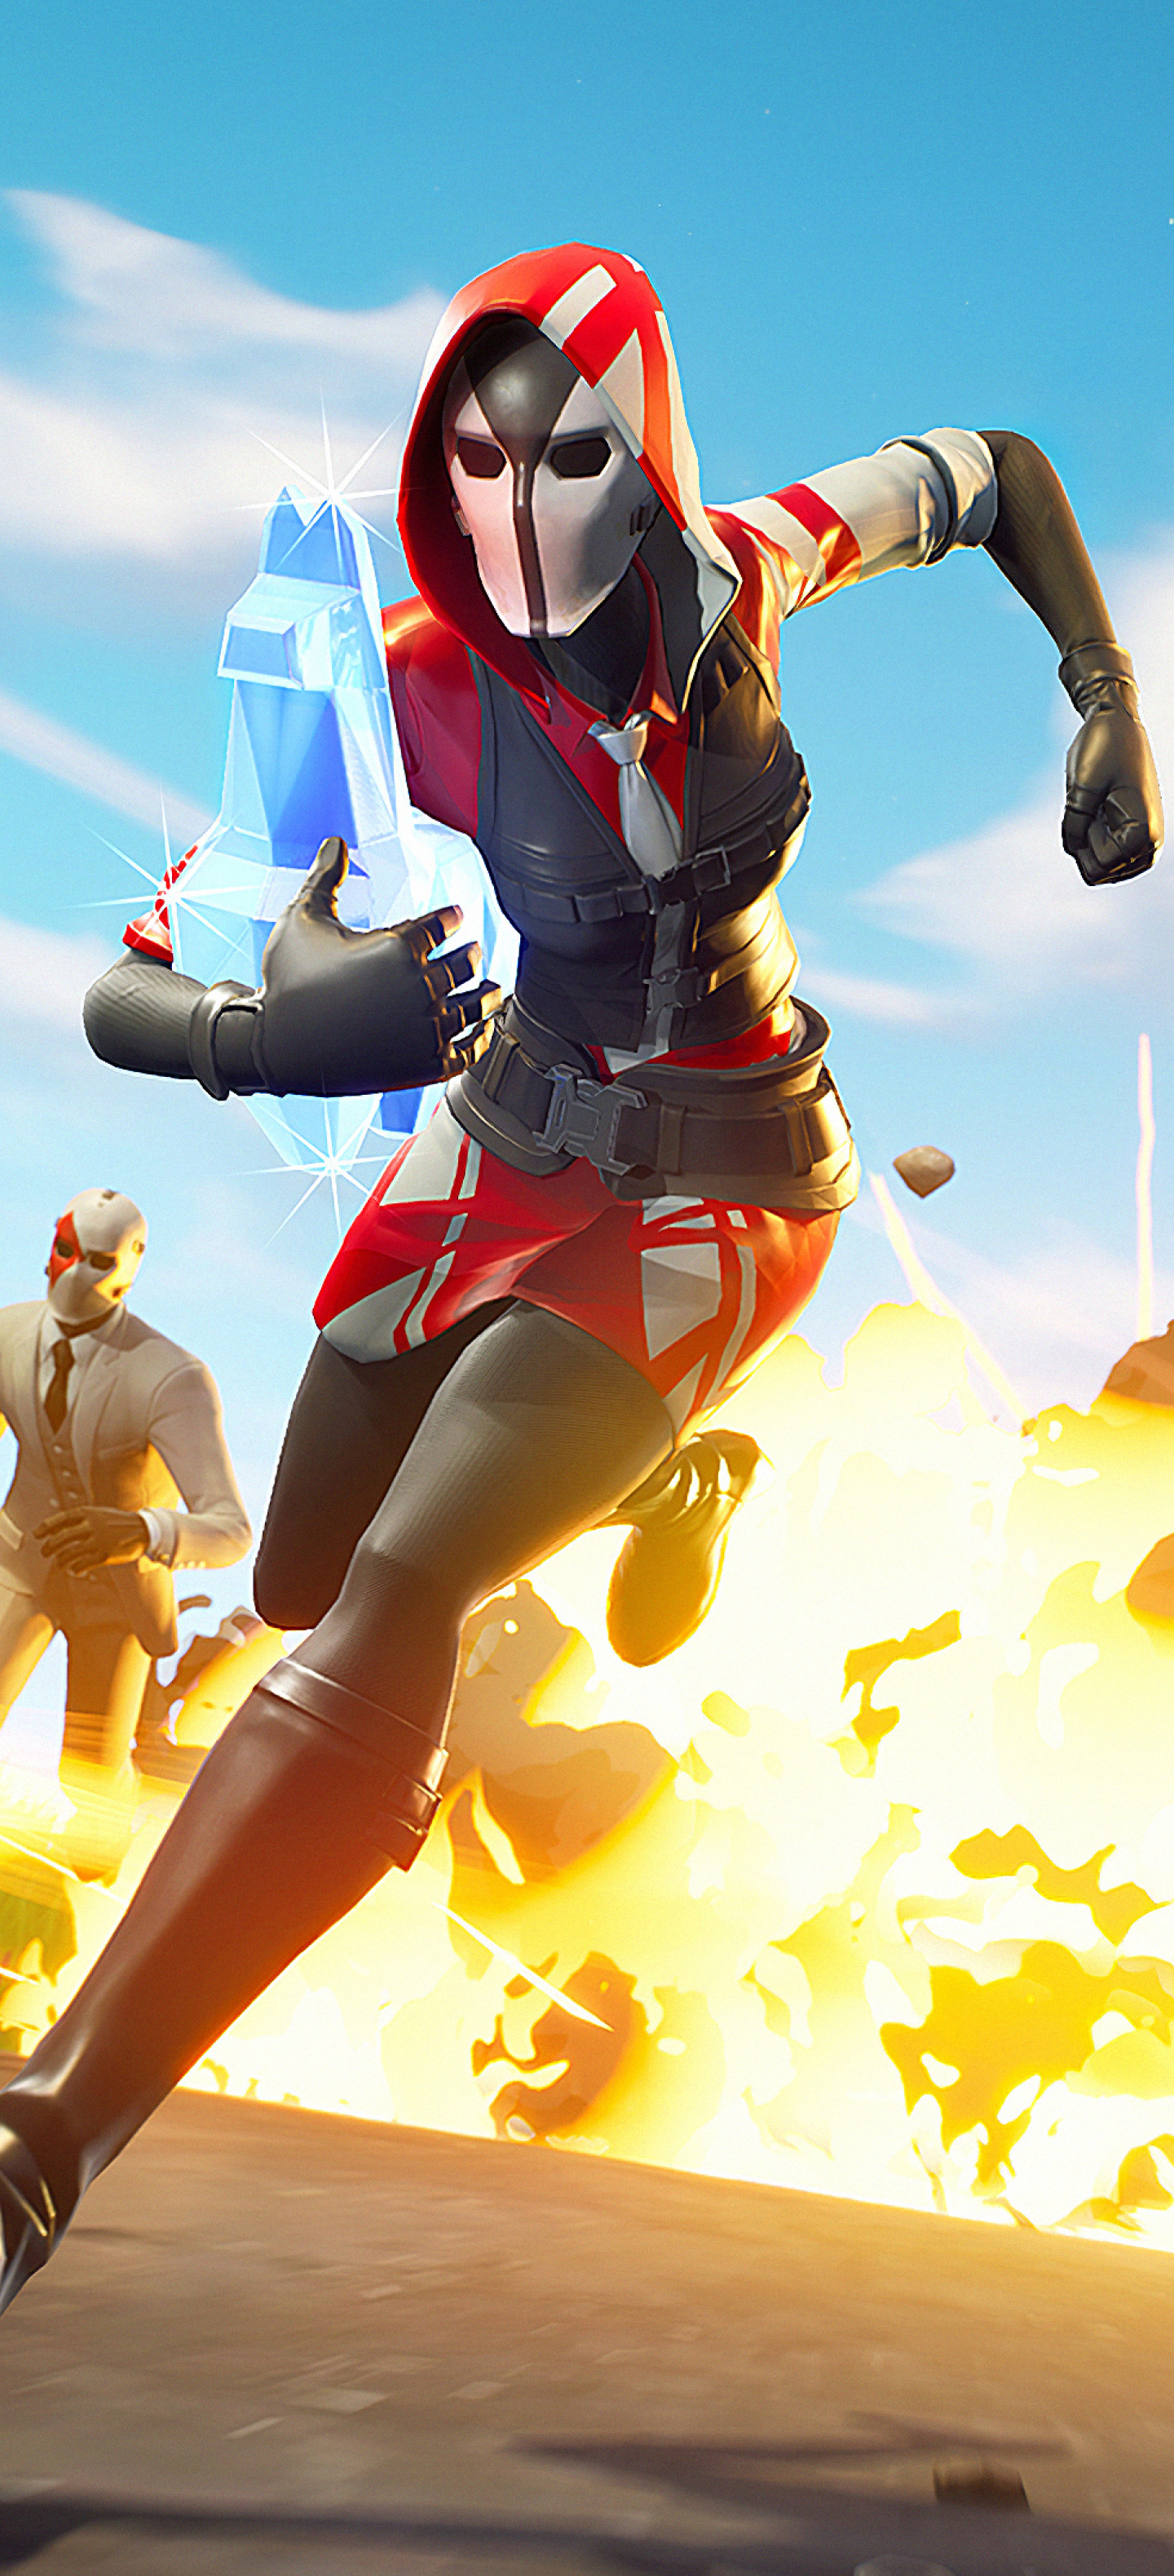 1440x3160 Fortnite Winter Royale 1440x3160 Resolution Wallpaper Hd Games 4k Wallpapers Images Photos And Background Wallpapers Den